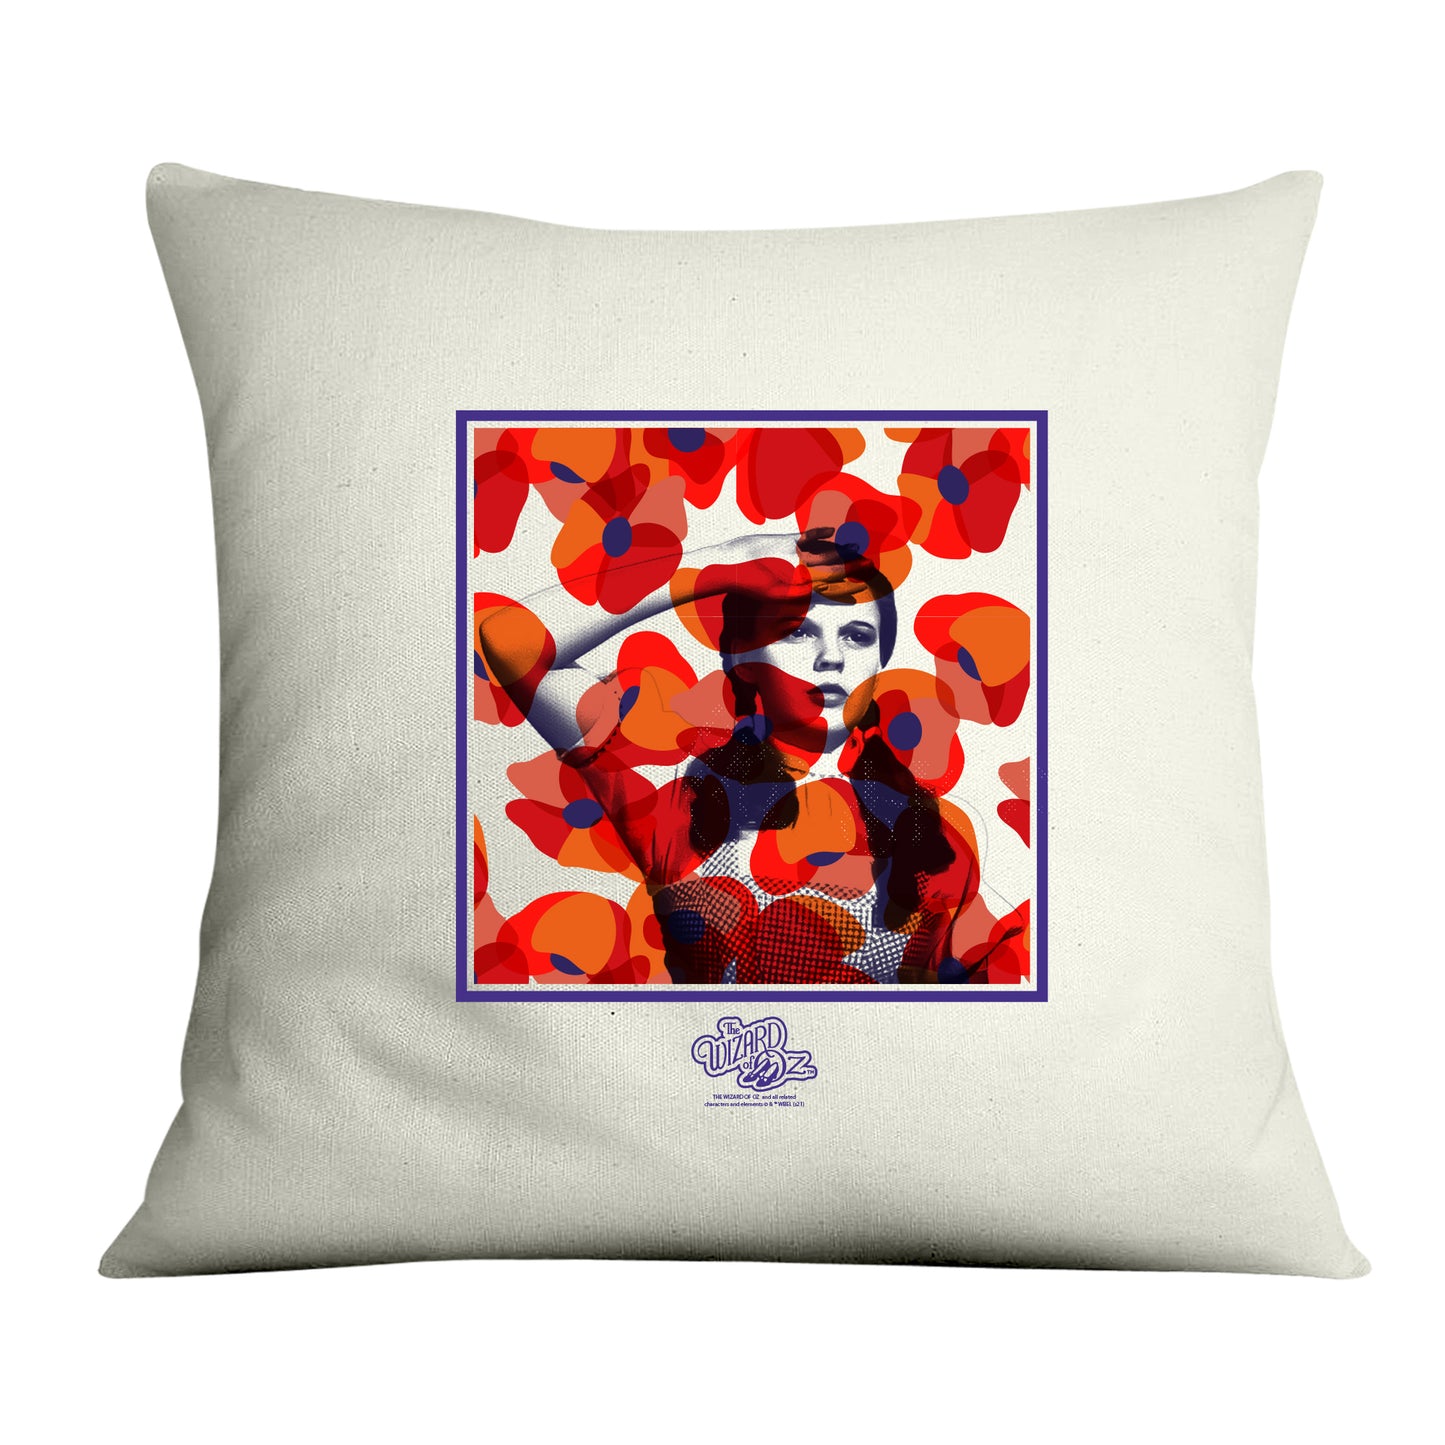 The Wizard of Oz Poppies Cushion